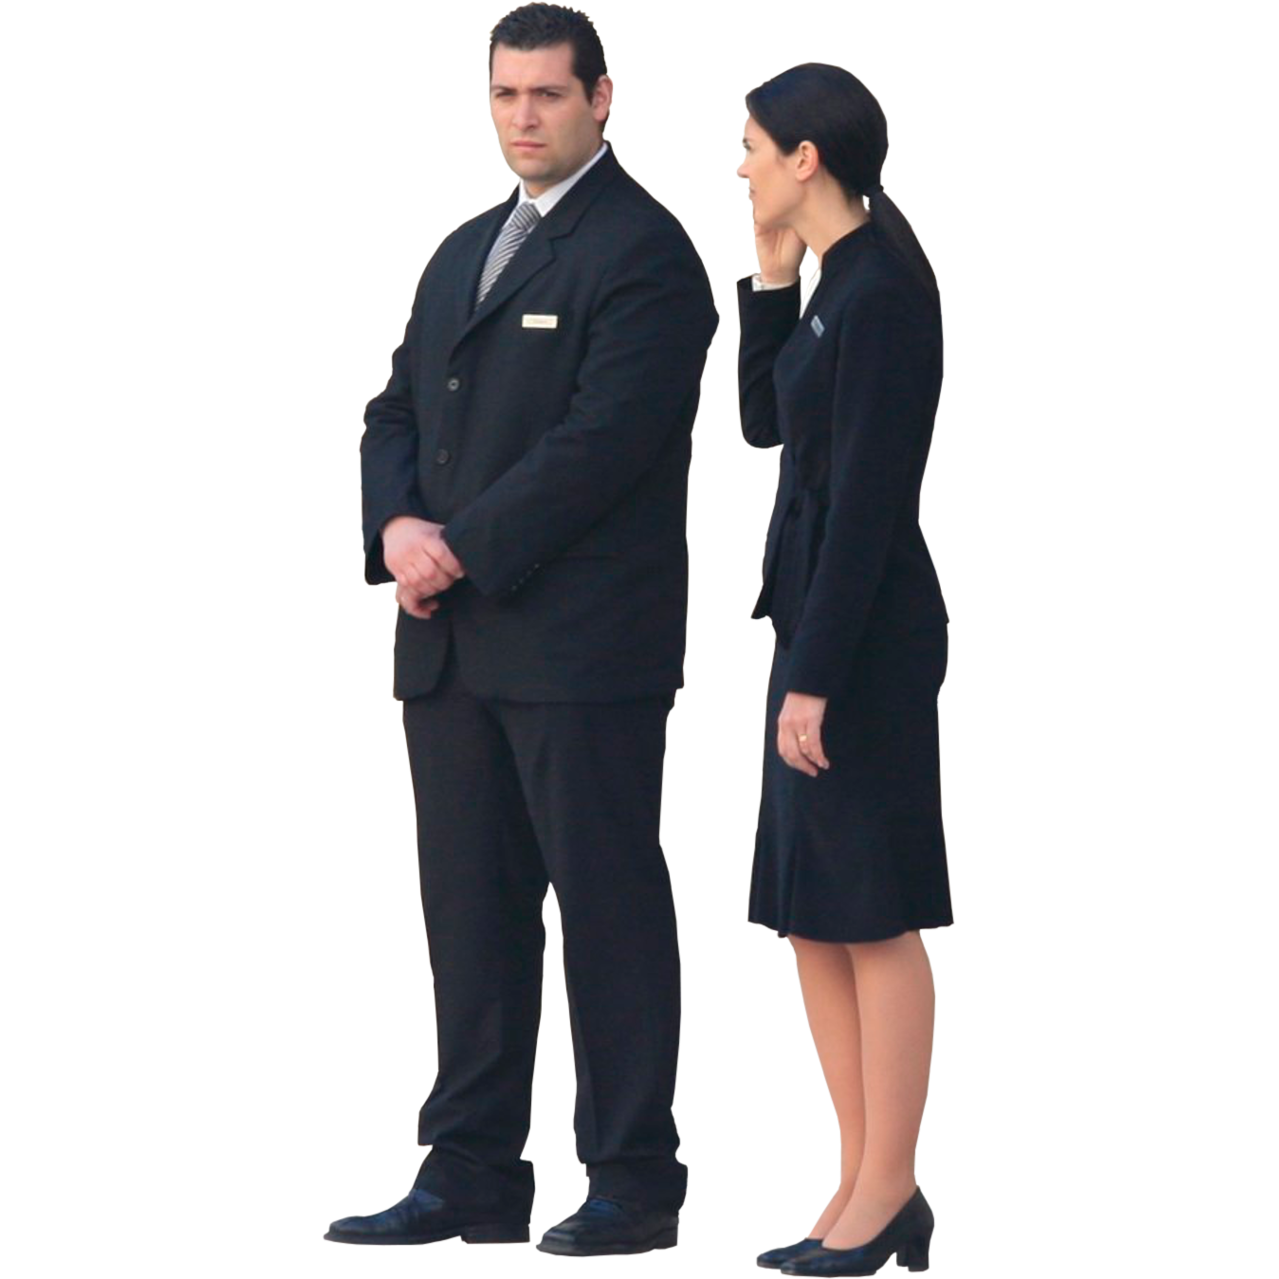 Business People Photos PNG Image